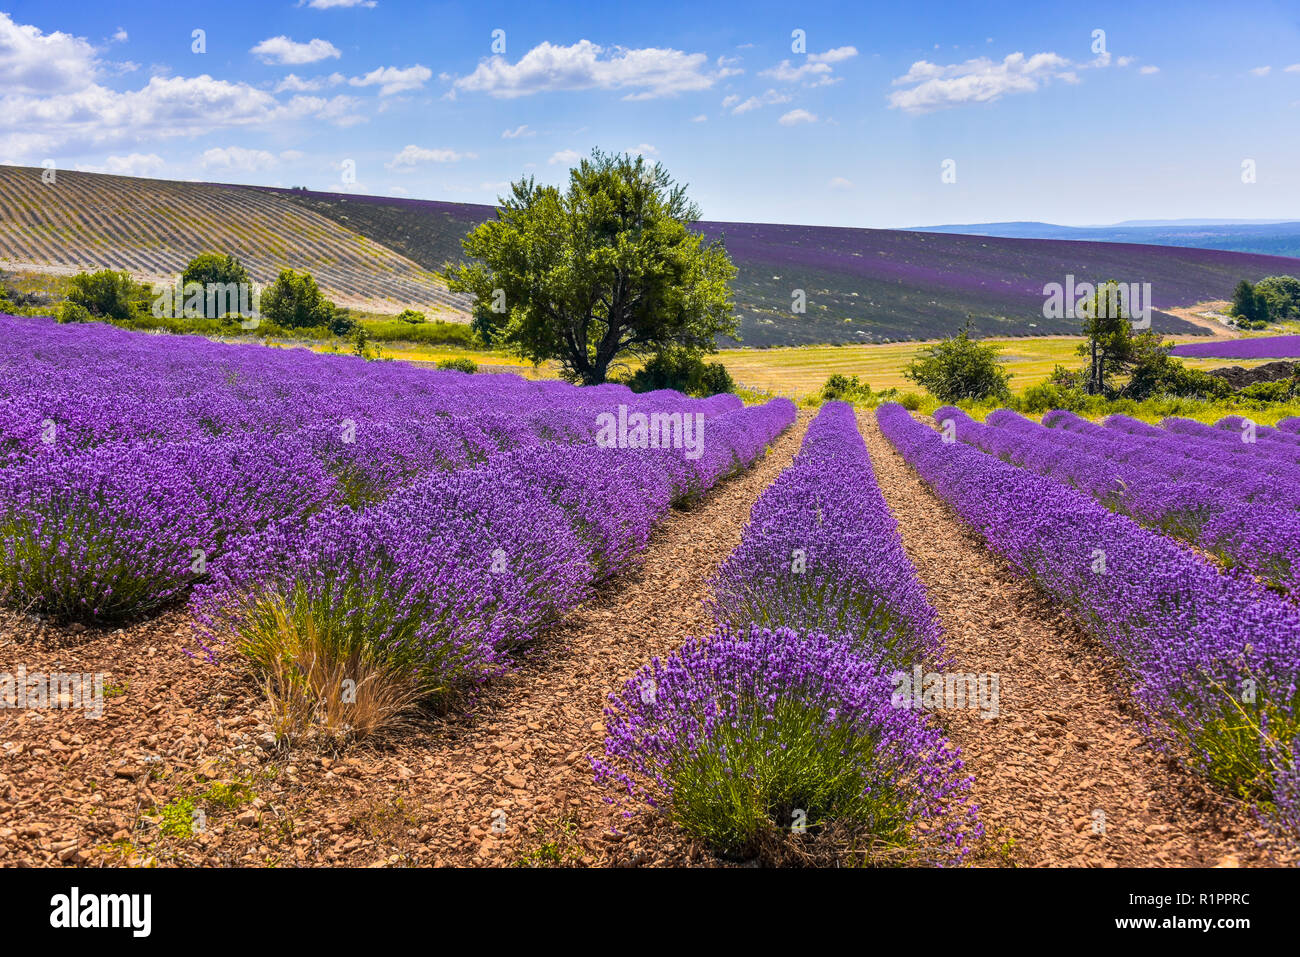 lavender field with landcape and tree, Ferrassières, Provence, France Stock Photo